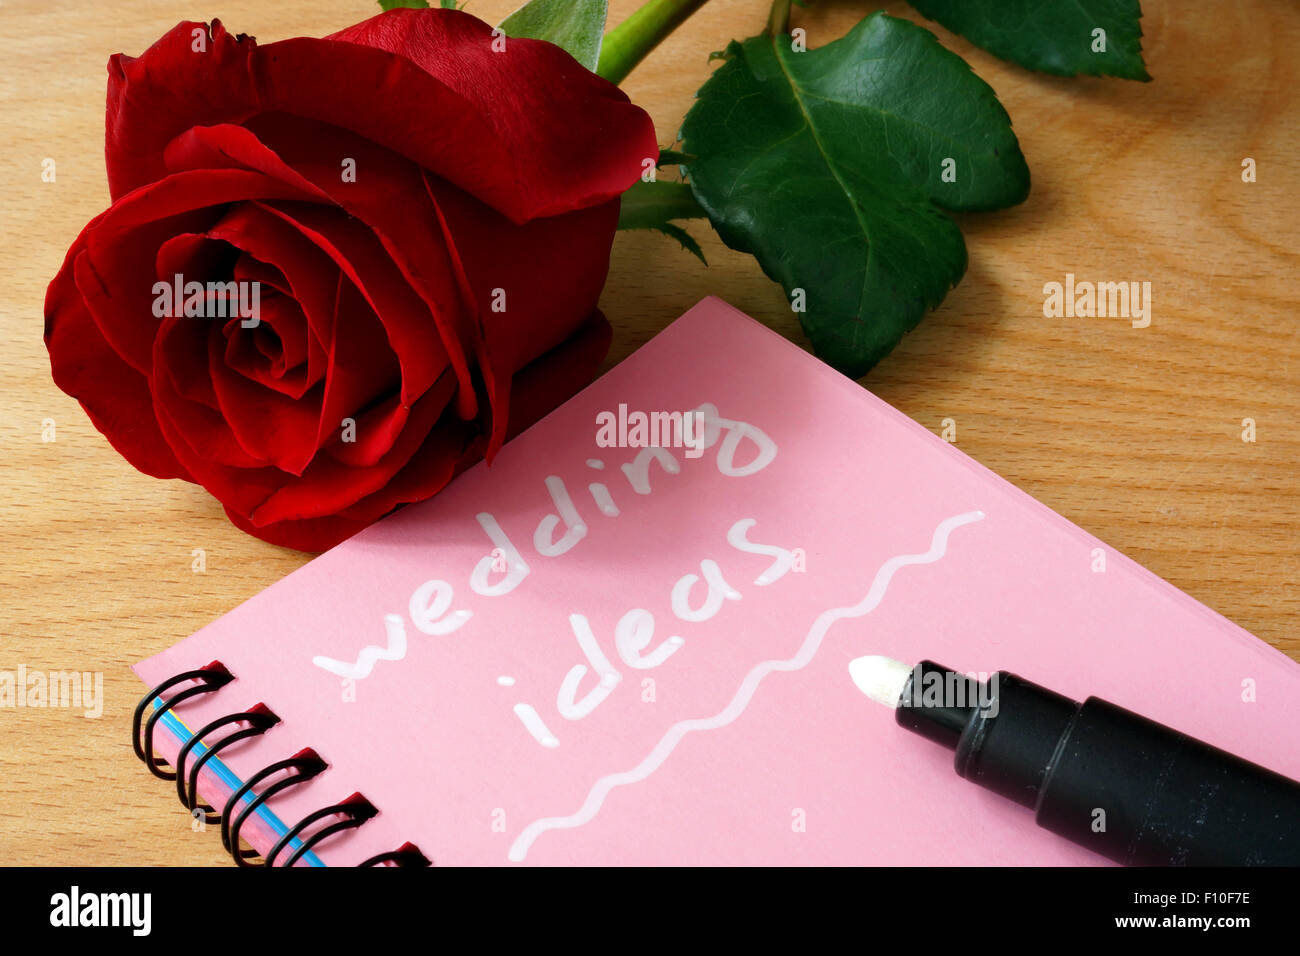 Pink notepad with wedding ideas and rose on a wooden background. Stock Photo